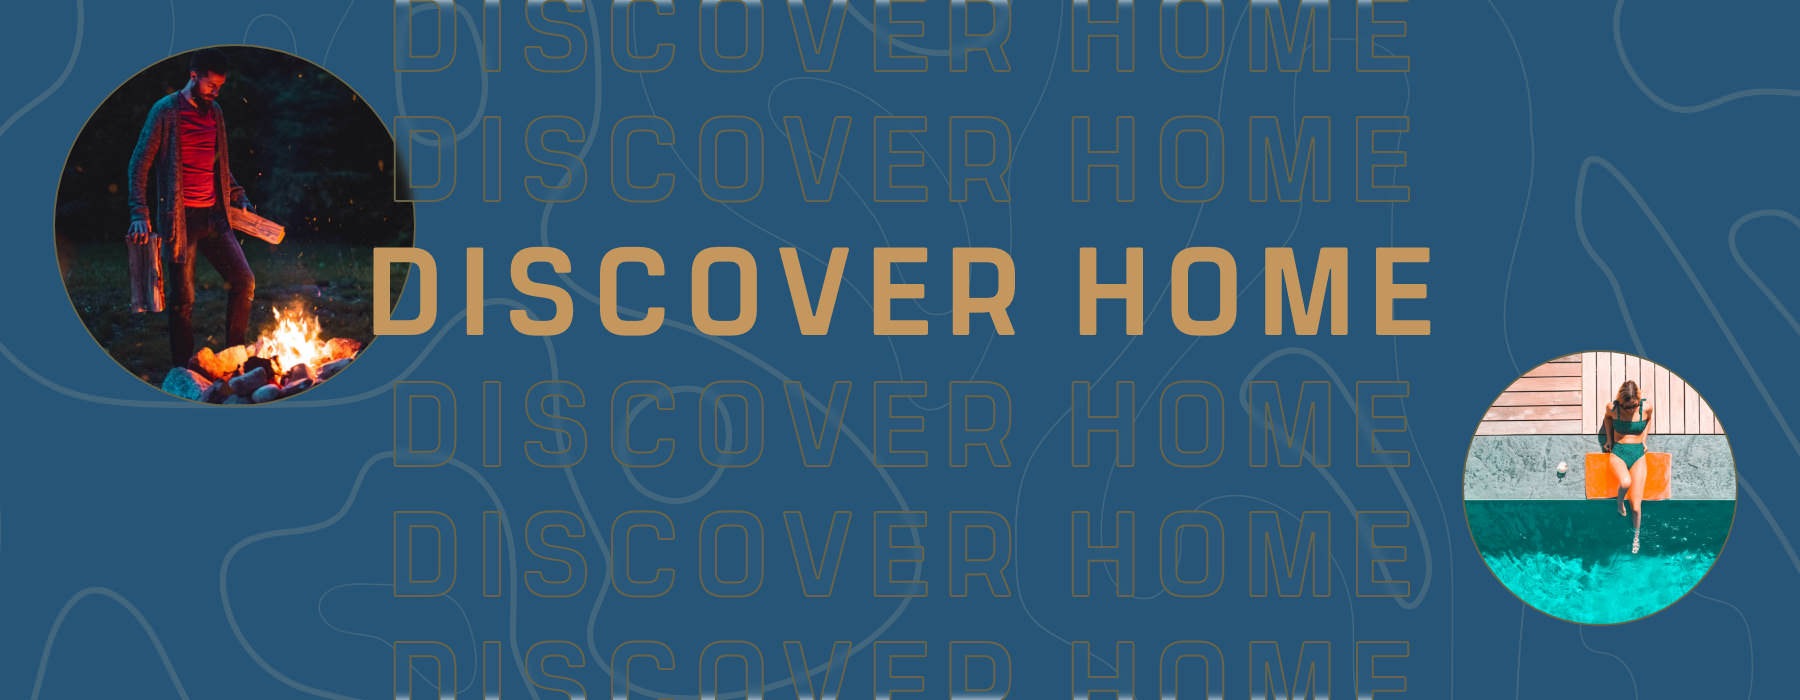 Discover Home graphic with images in circles